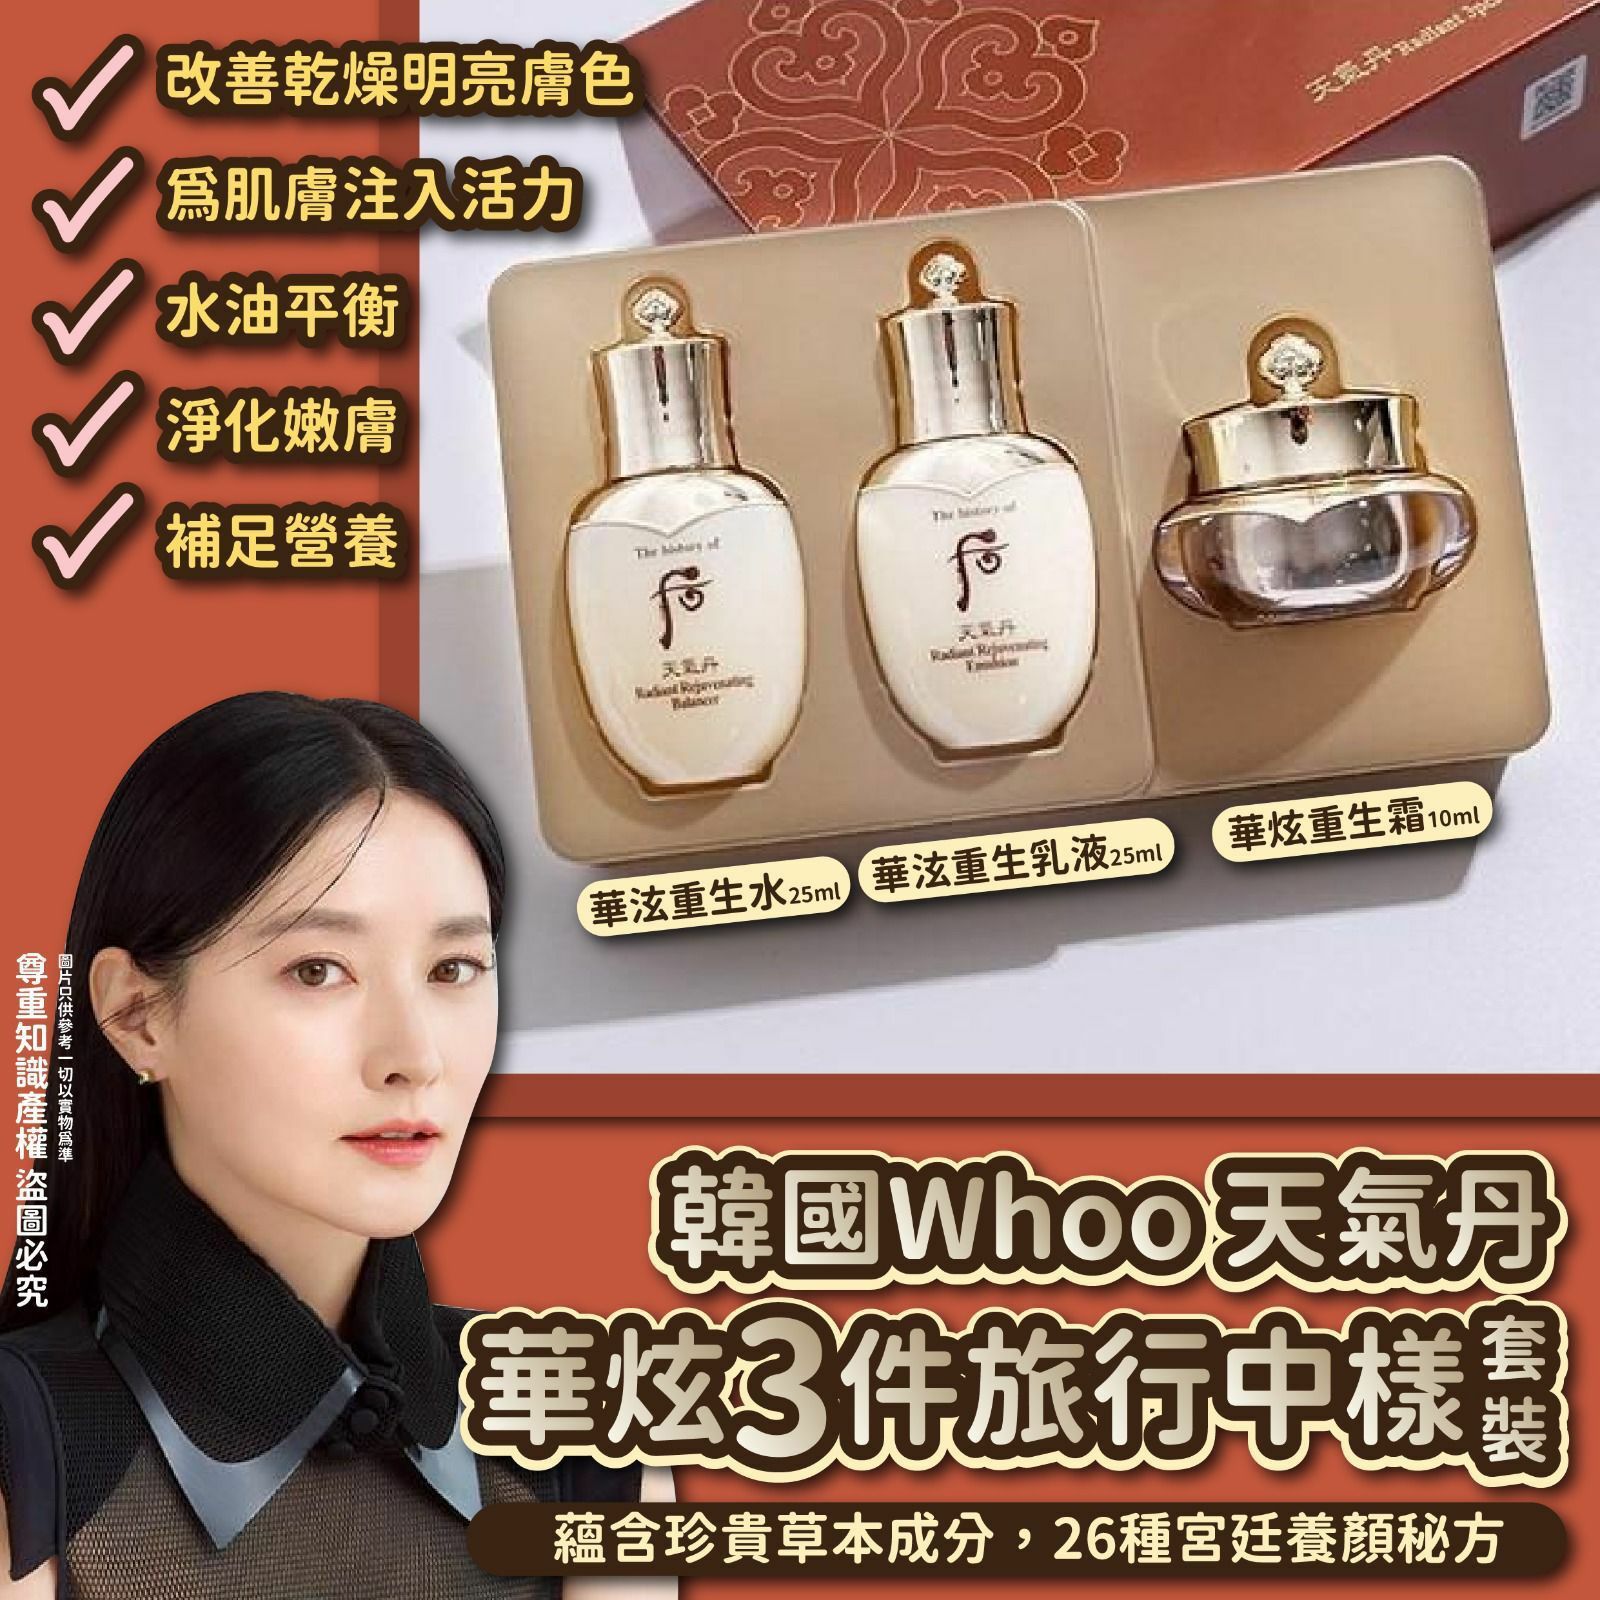 THE HISTORY OF WHOO